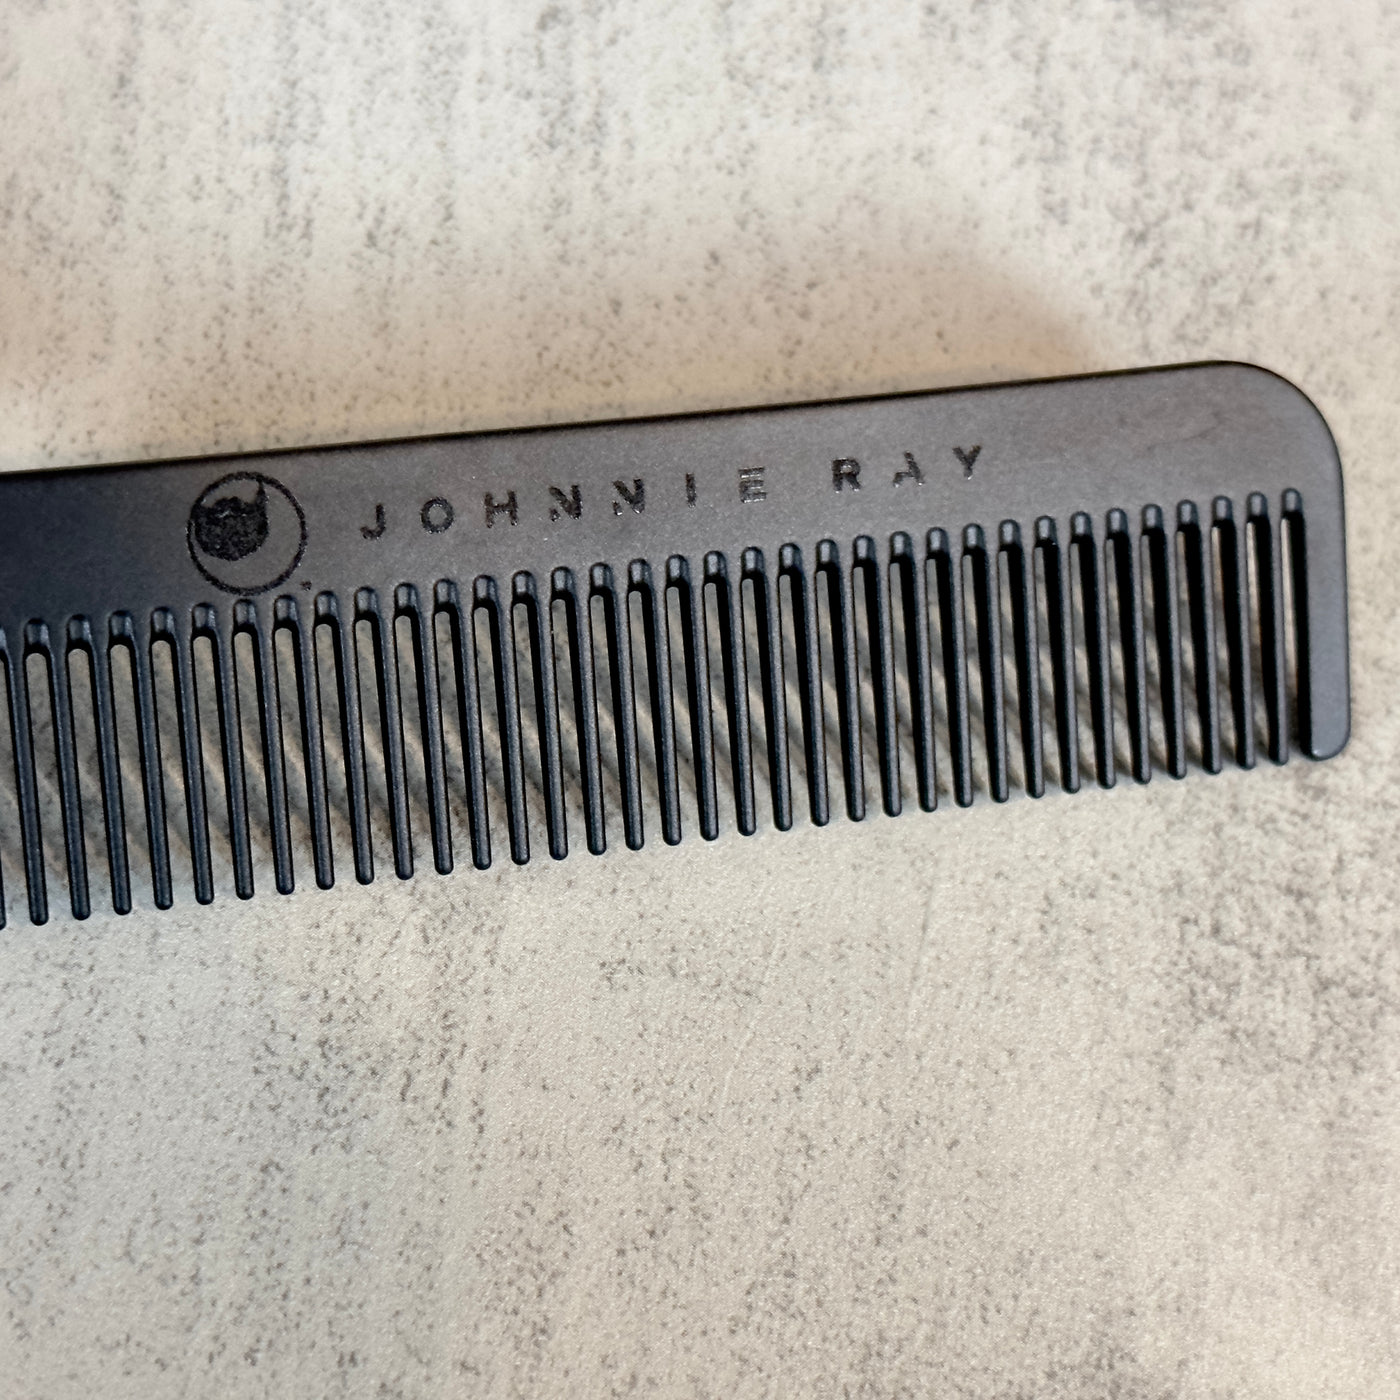 Black Chicago Comb Model 1 angled to show Johnnie Ray logo engraving across the top/